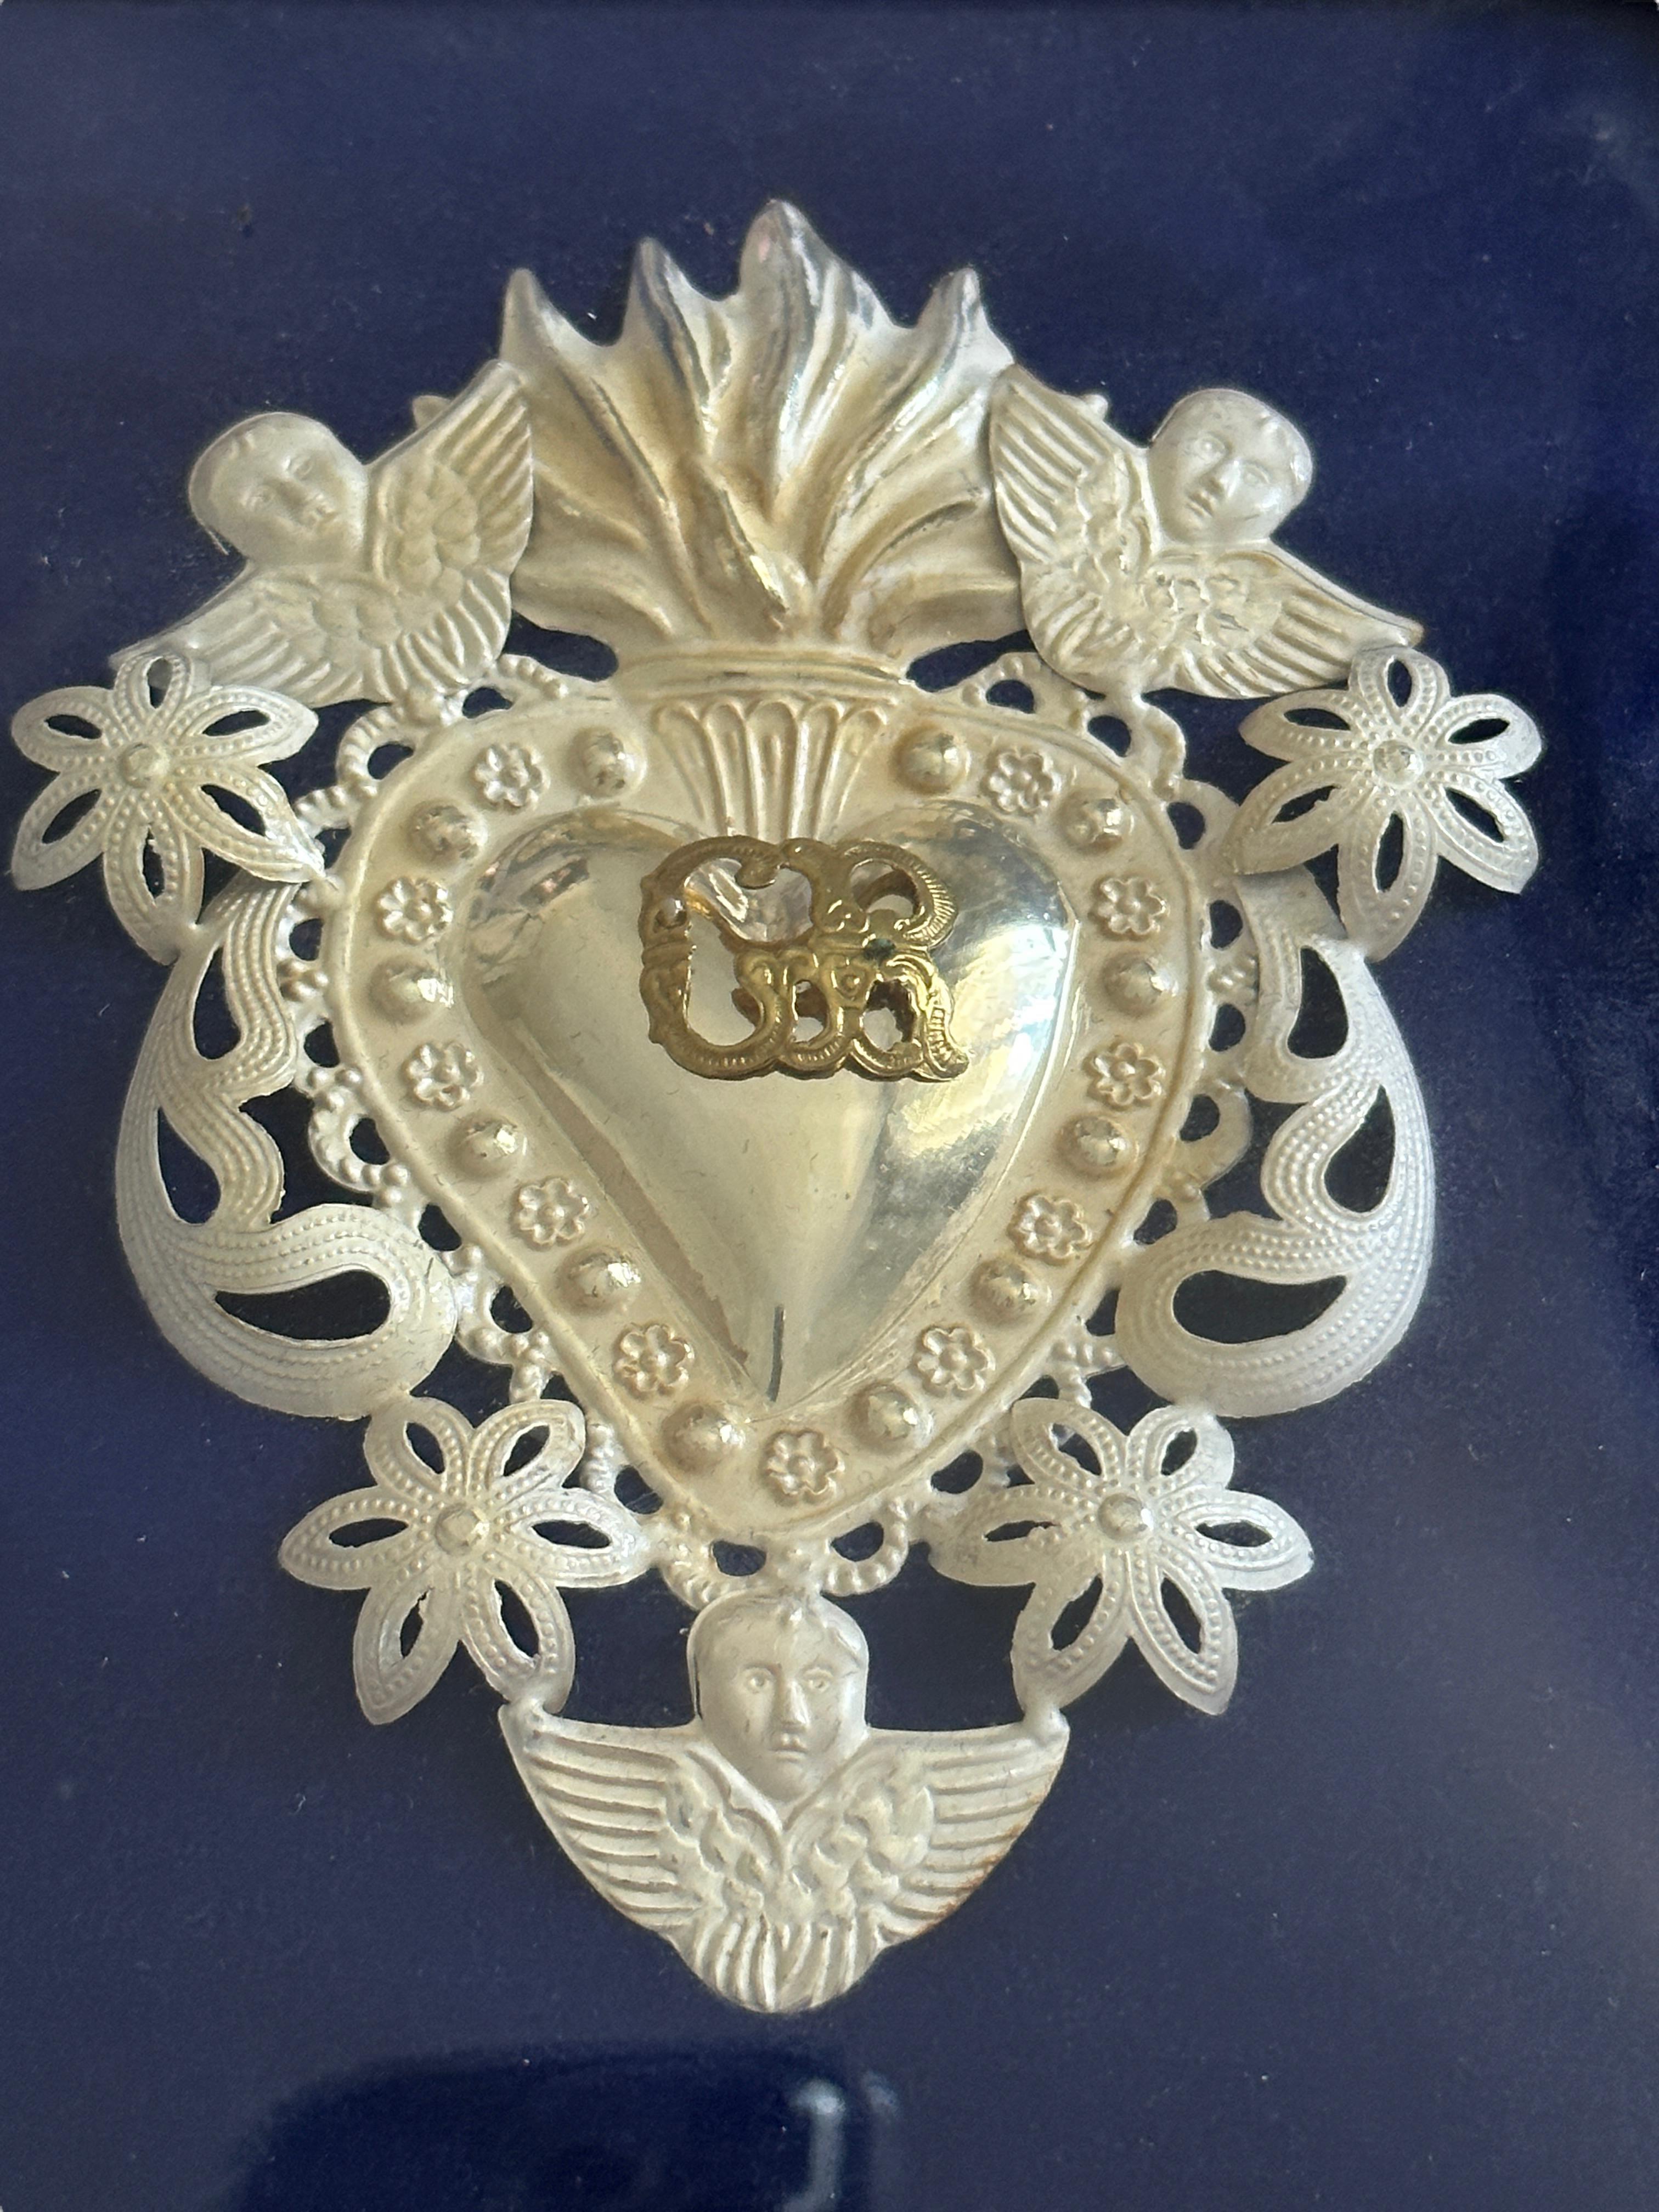 Framed and donated in the 1970s this vintage ex voto is a real beautiful collectible. I do not know what it is made of, thin and light filigree silver or silver plated metal. It is handmade, embossed and then welded. Given the delicacy, I did not